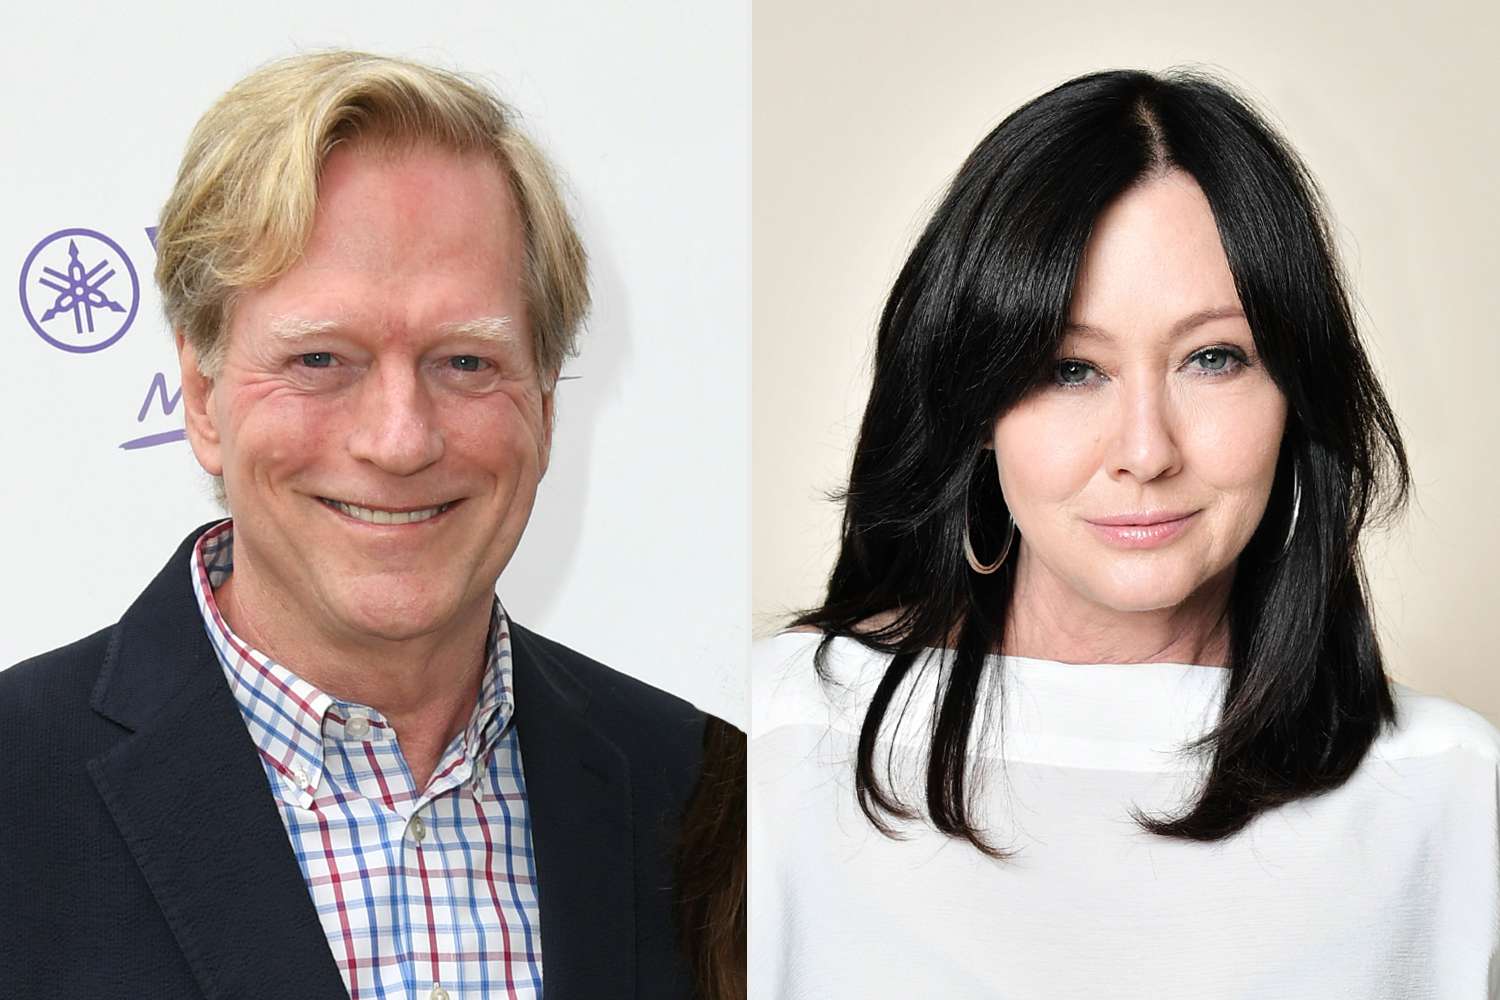 Little House on the Prairie’s Dean Butler Remembers 'Determined' Shannen Doherty: 'She Was Going to Succeed' (Exclusive)